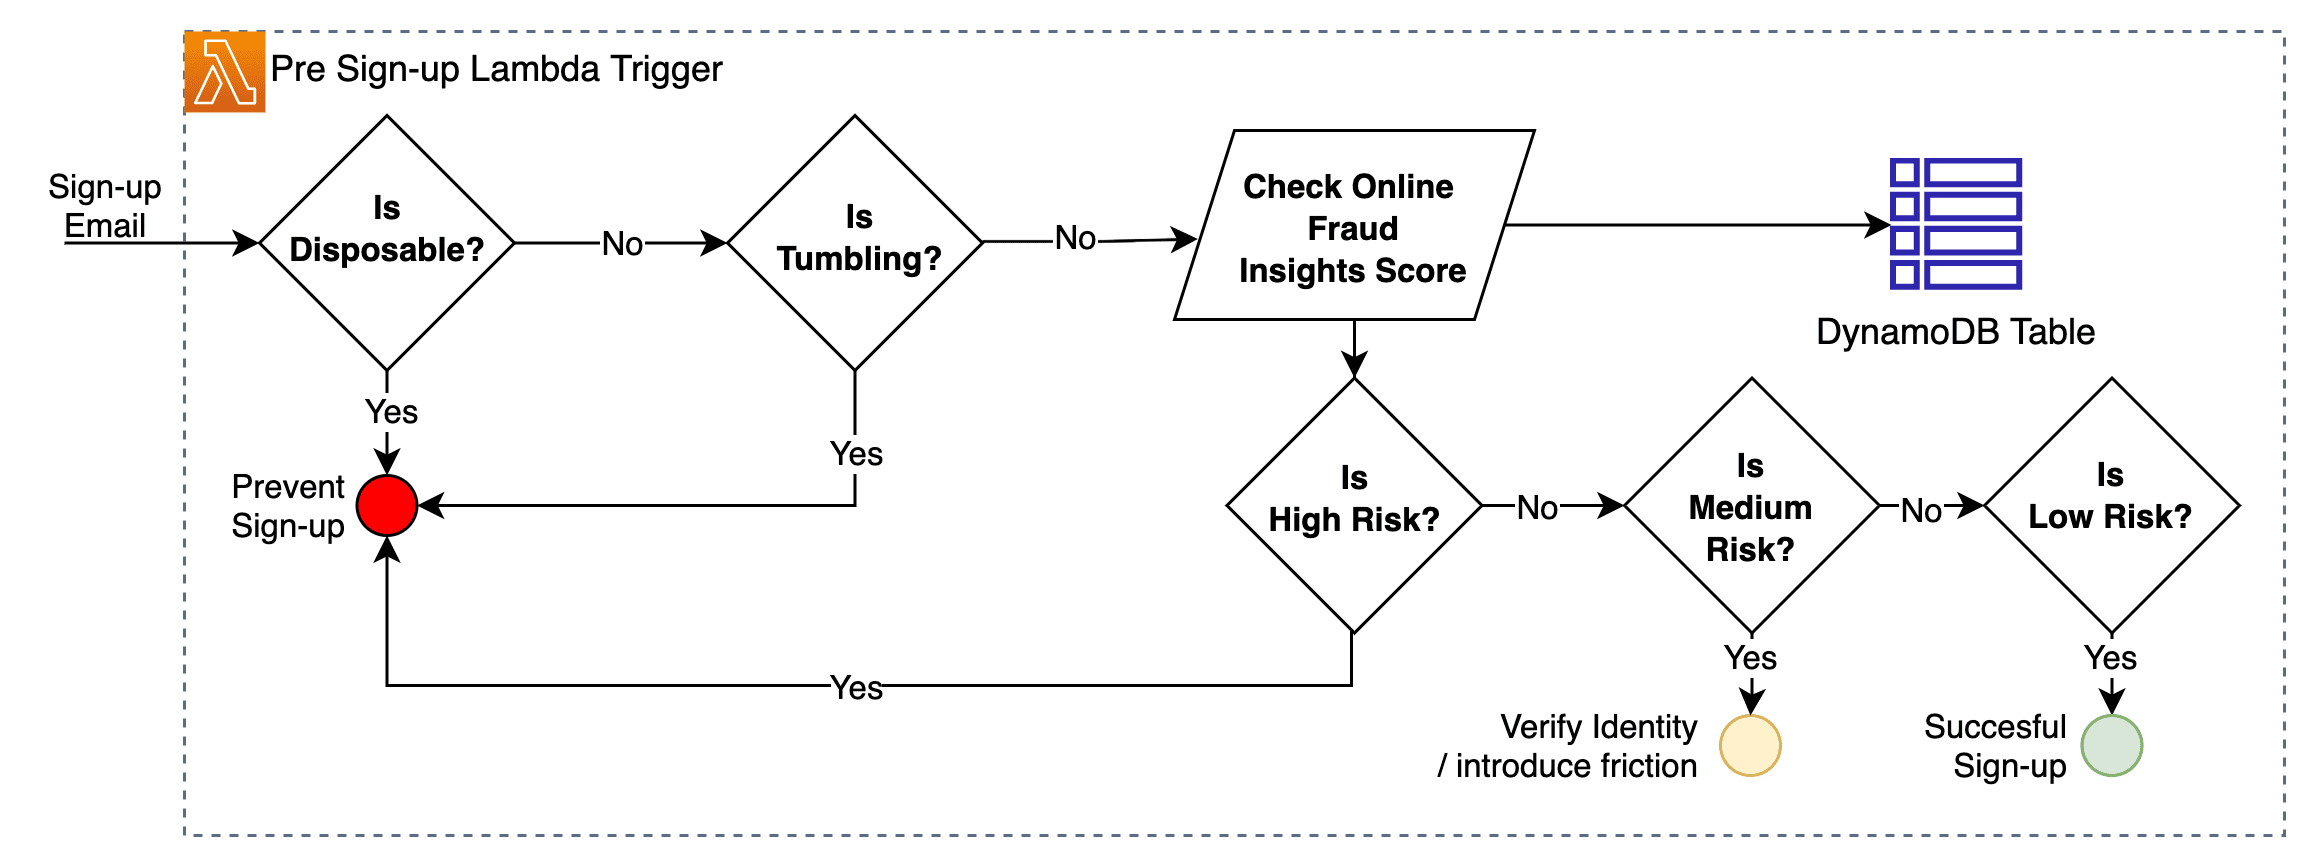 Logical flow of validations in an Amazon Cognito pre sign-up Lambda function for fraud prevention to filter disposable and tumbling email addresses and assess risk score using Amazon Fraud Detector